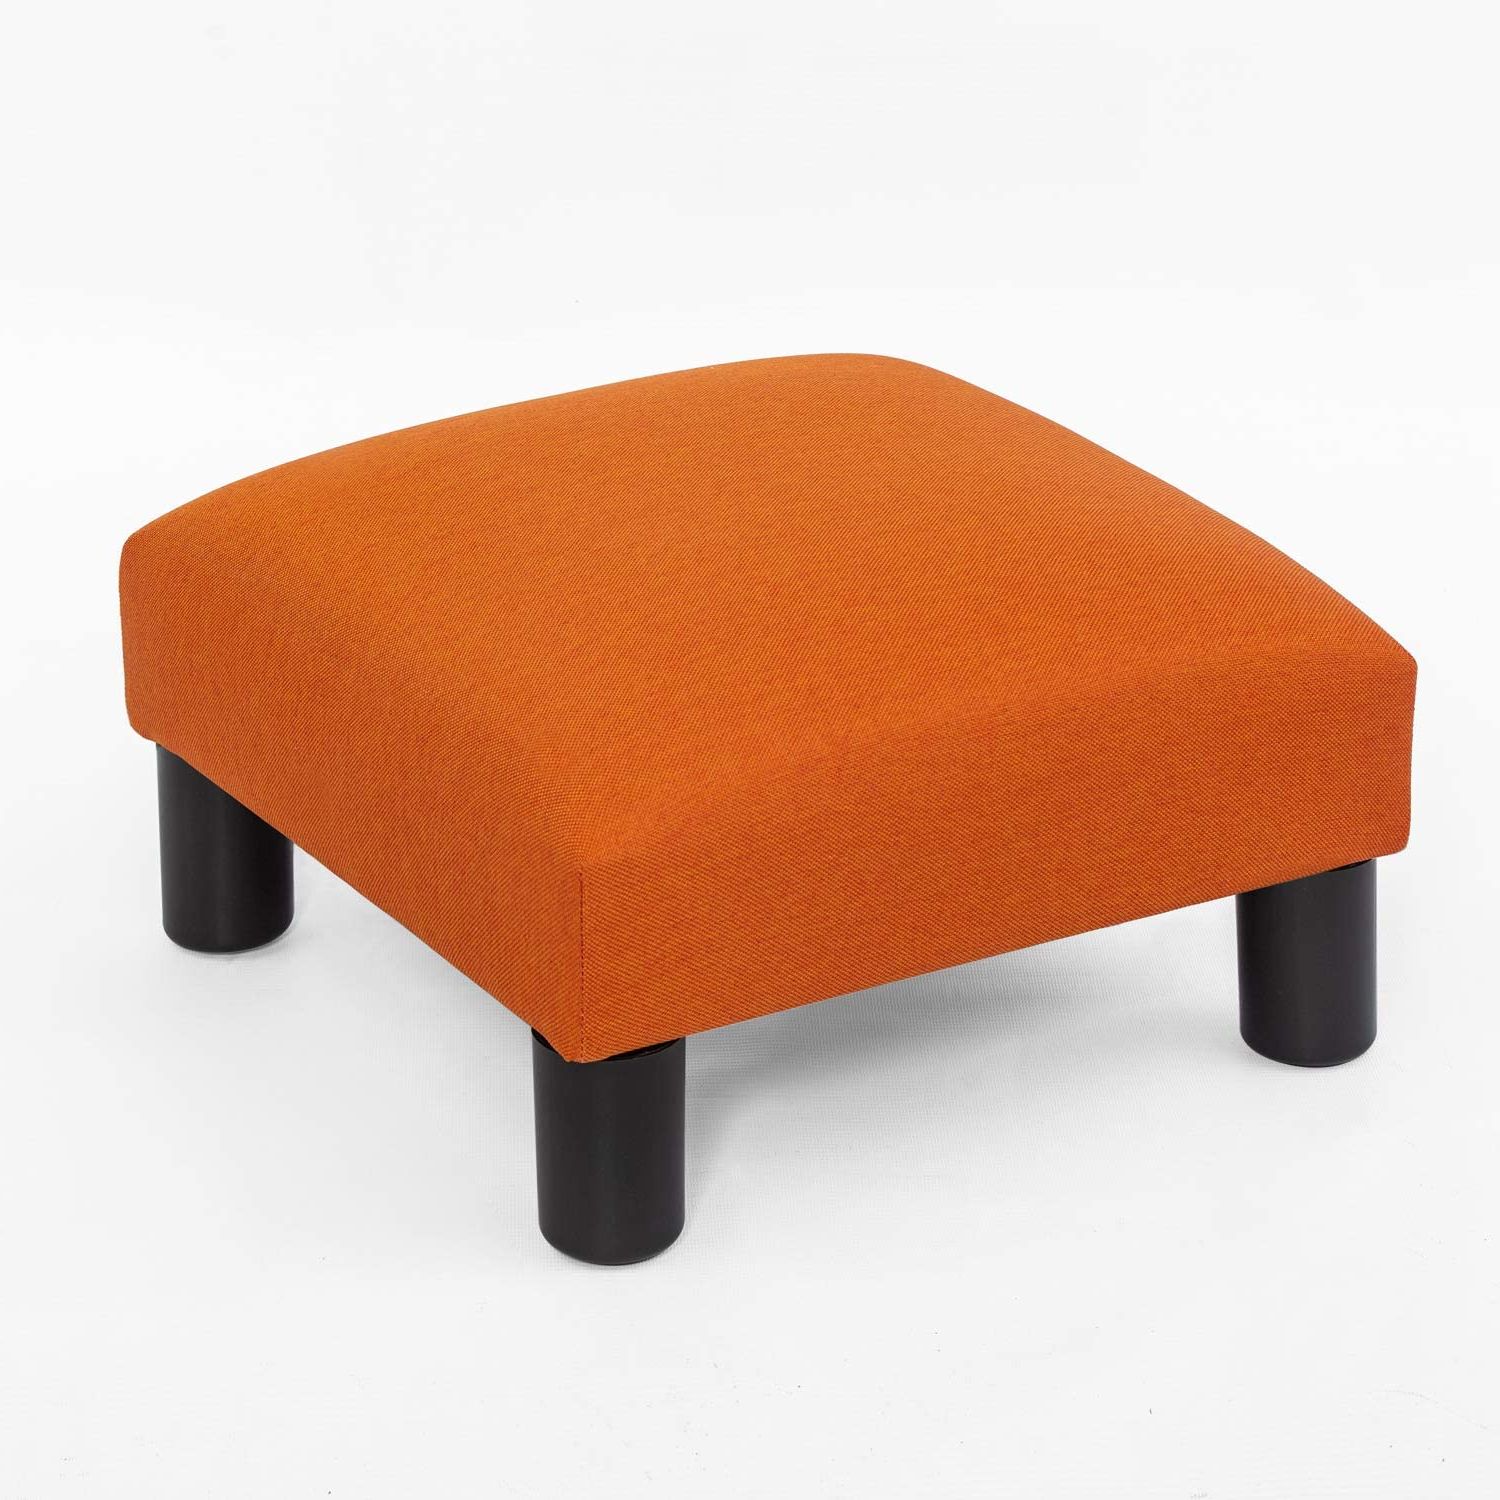 Most Popular Gray And Cream Geometric Cuboid Pouf Ottomans In Best Ottoman Foot Stool Orange – Your House (View 4 of 10)